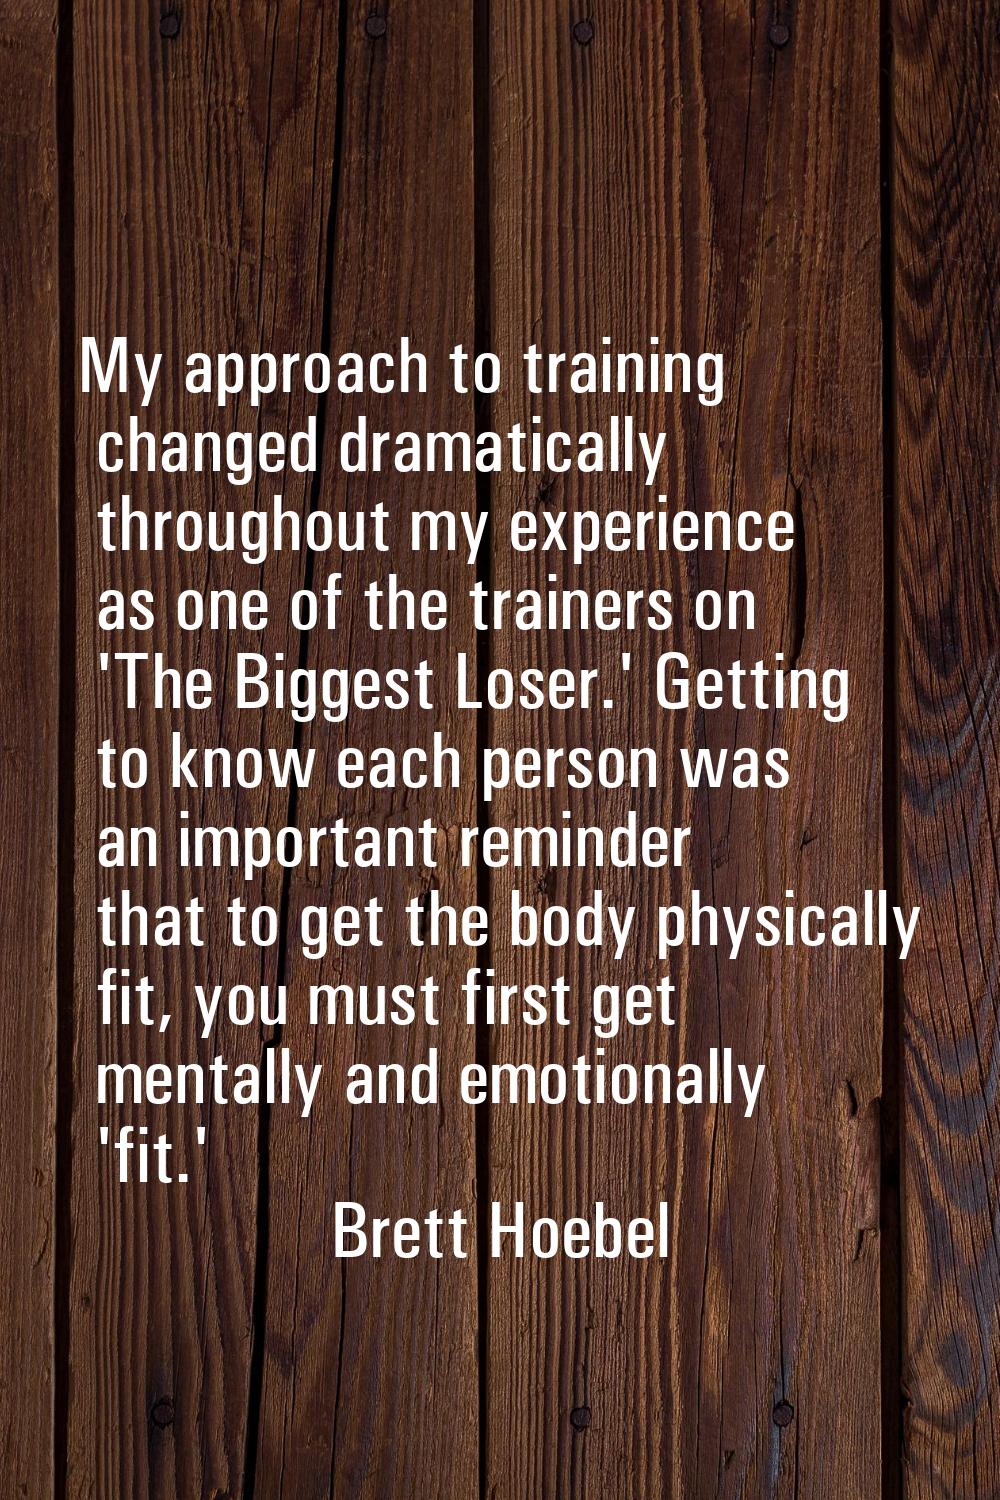 My approach to training changed dramatically throughout my experience as one of the trainers on 'Th